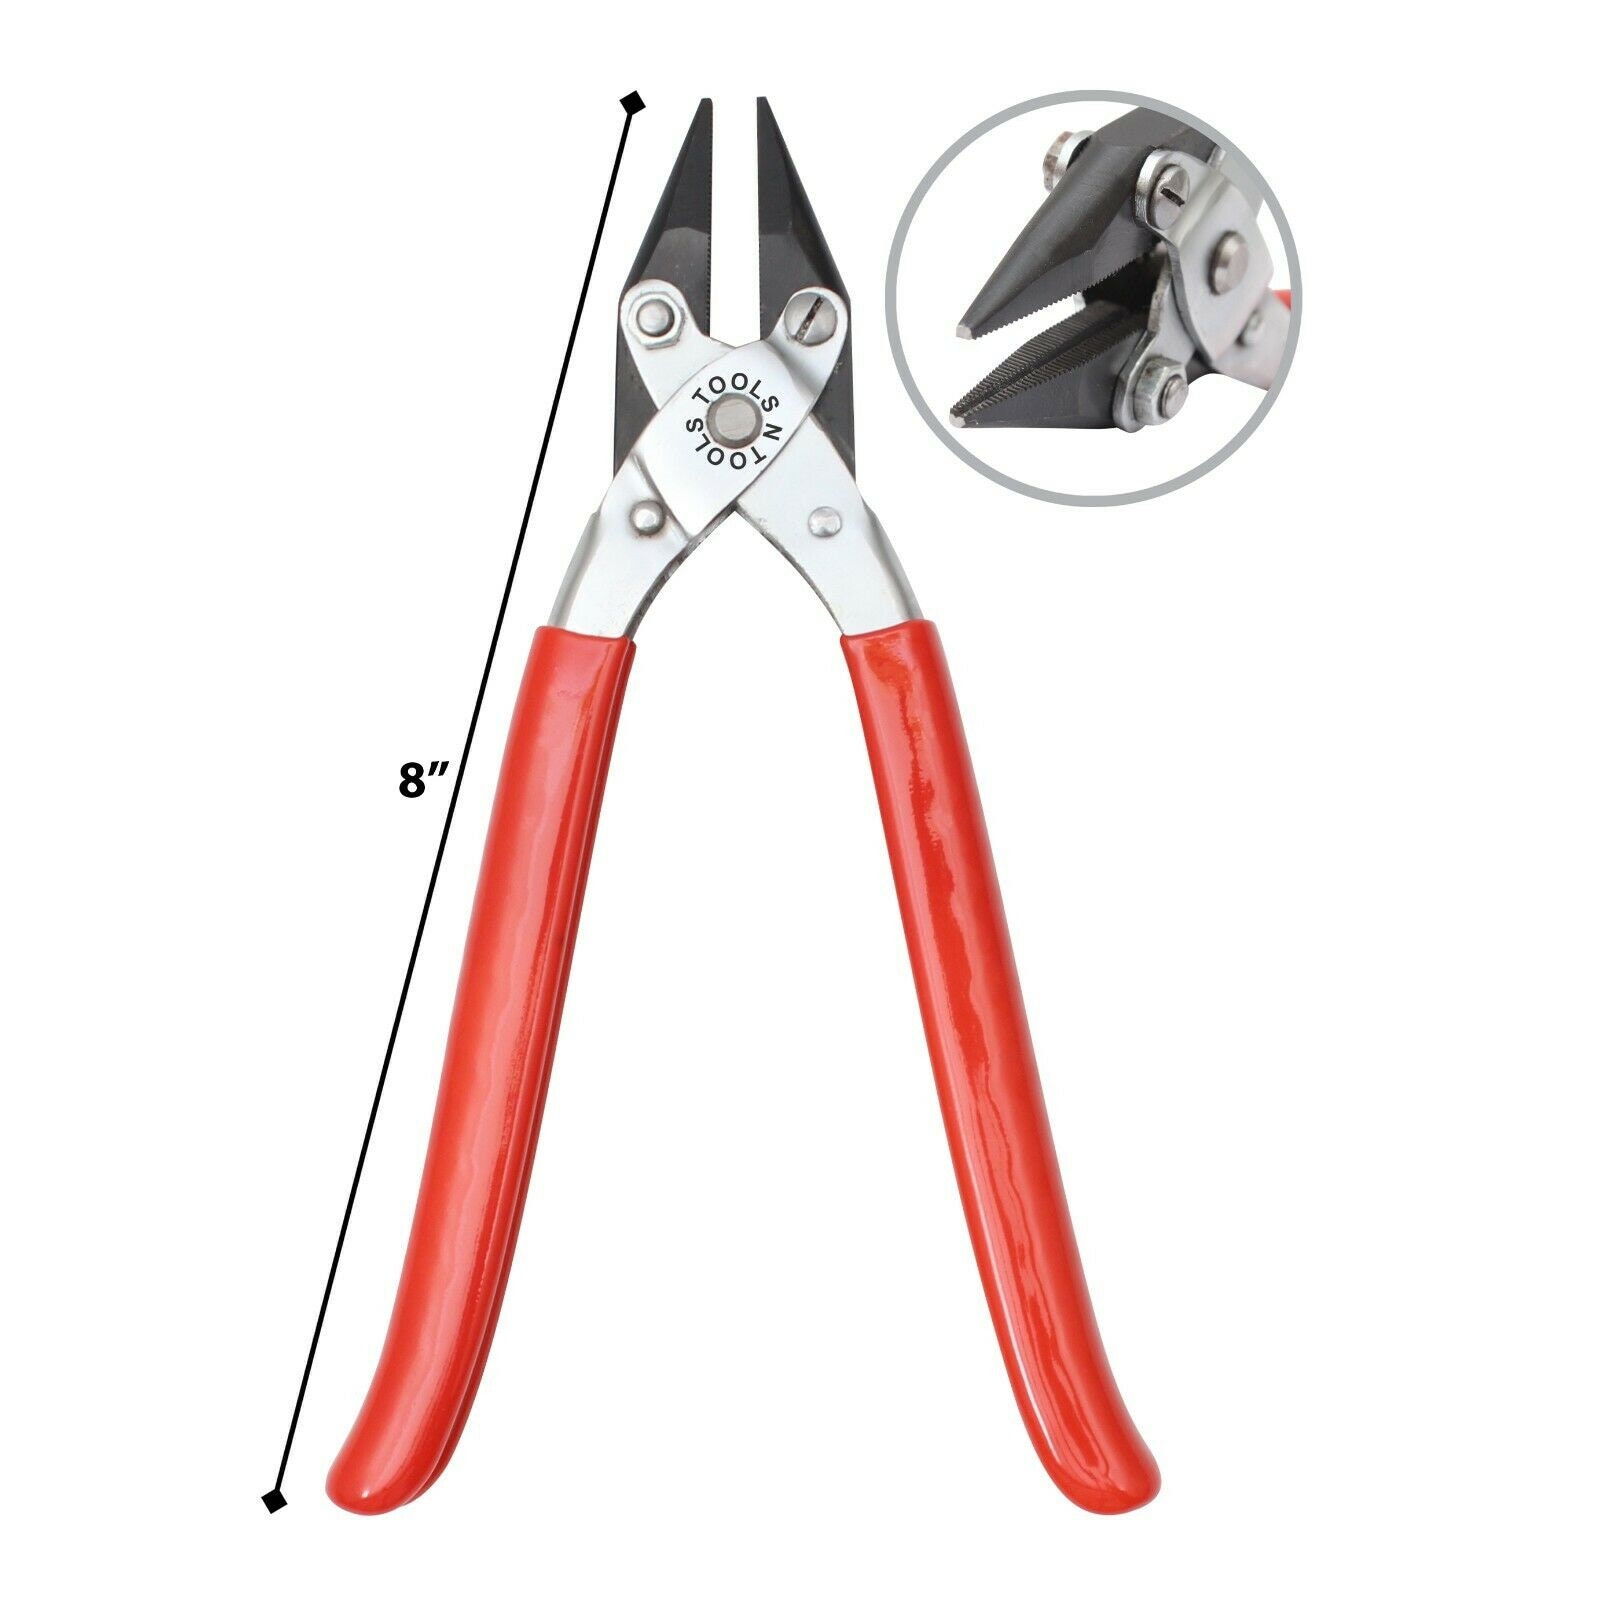 Parallel Pliers Wire Cutter